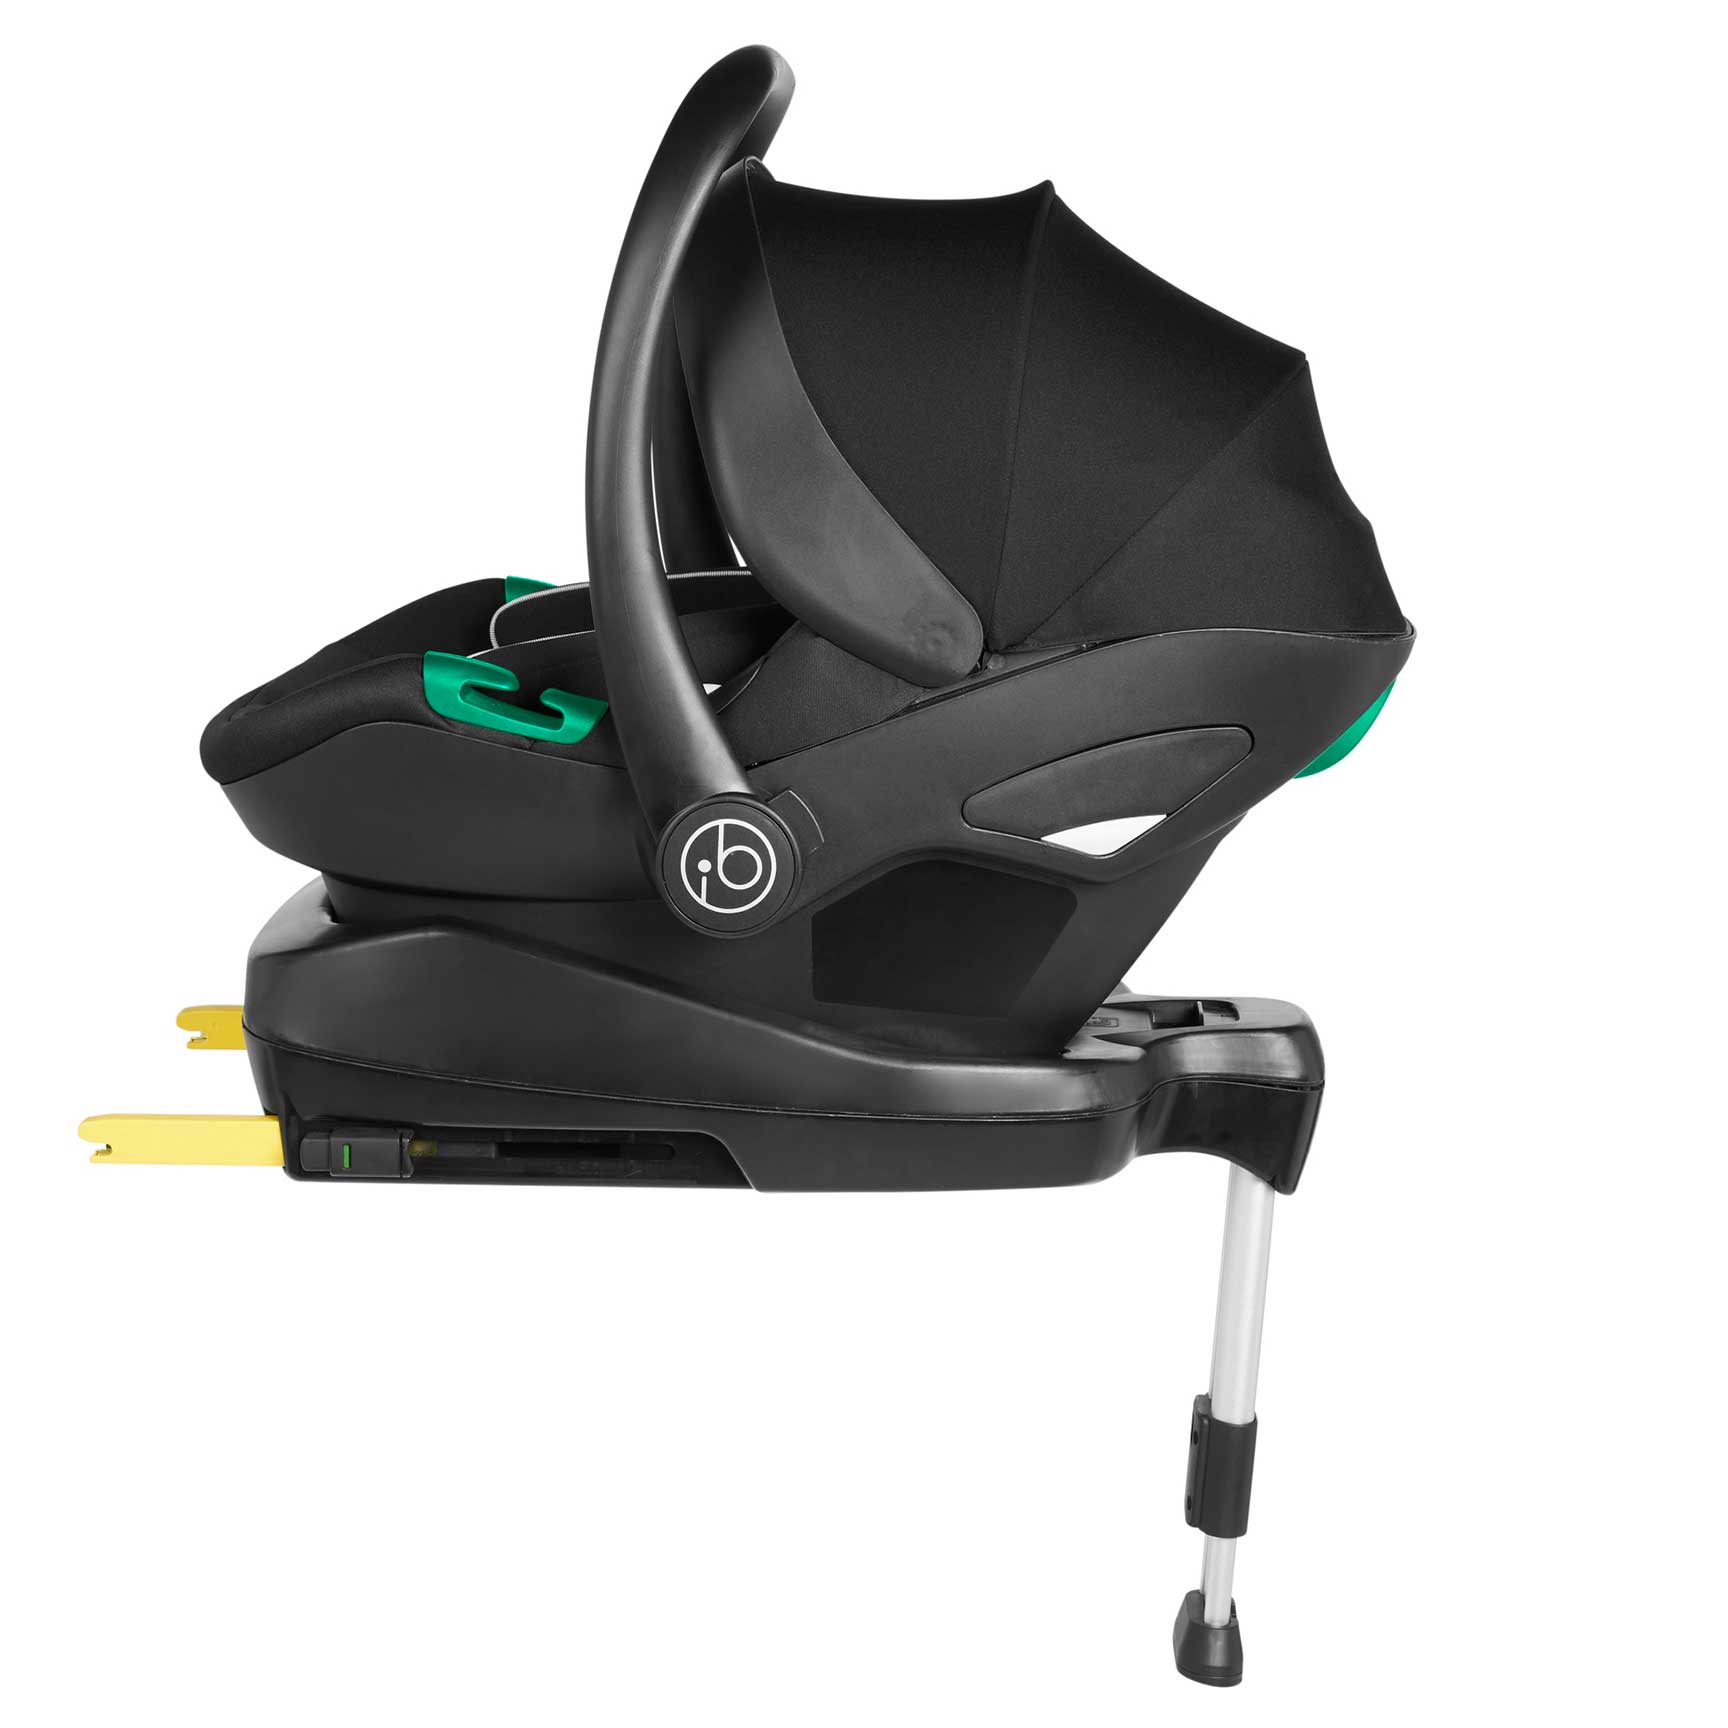 Ickle Bubba travel systems Ickle Bubba Stomp Luxe All-in-One Travel System with Isofix Base - Black/Woodland/Black 10-011-300-138